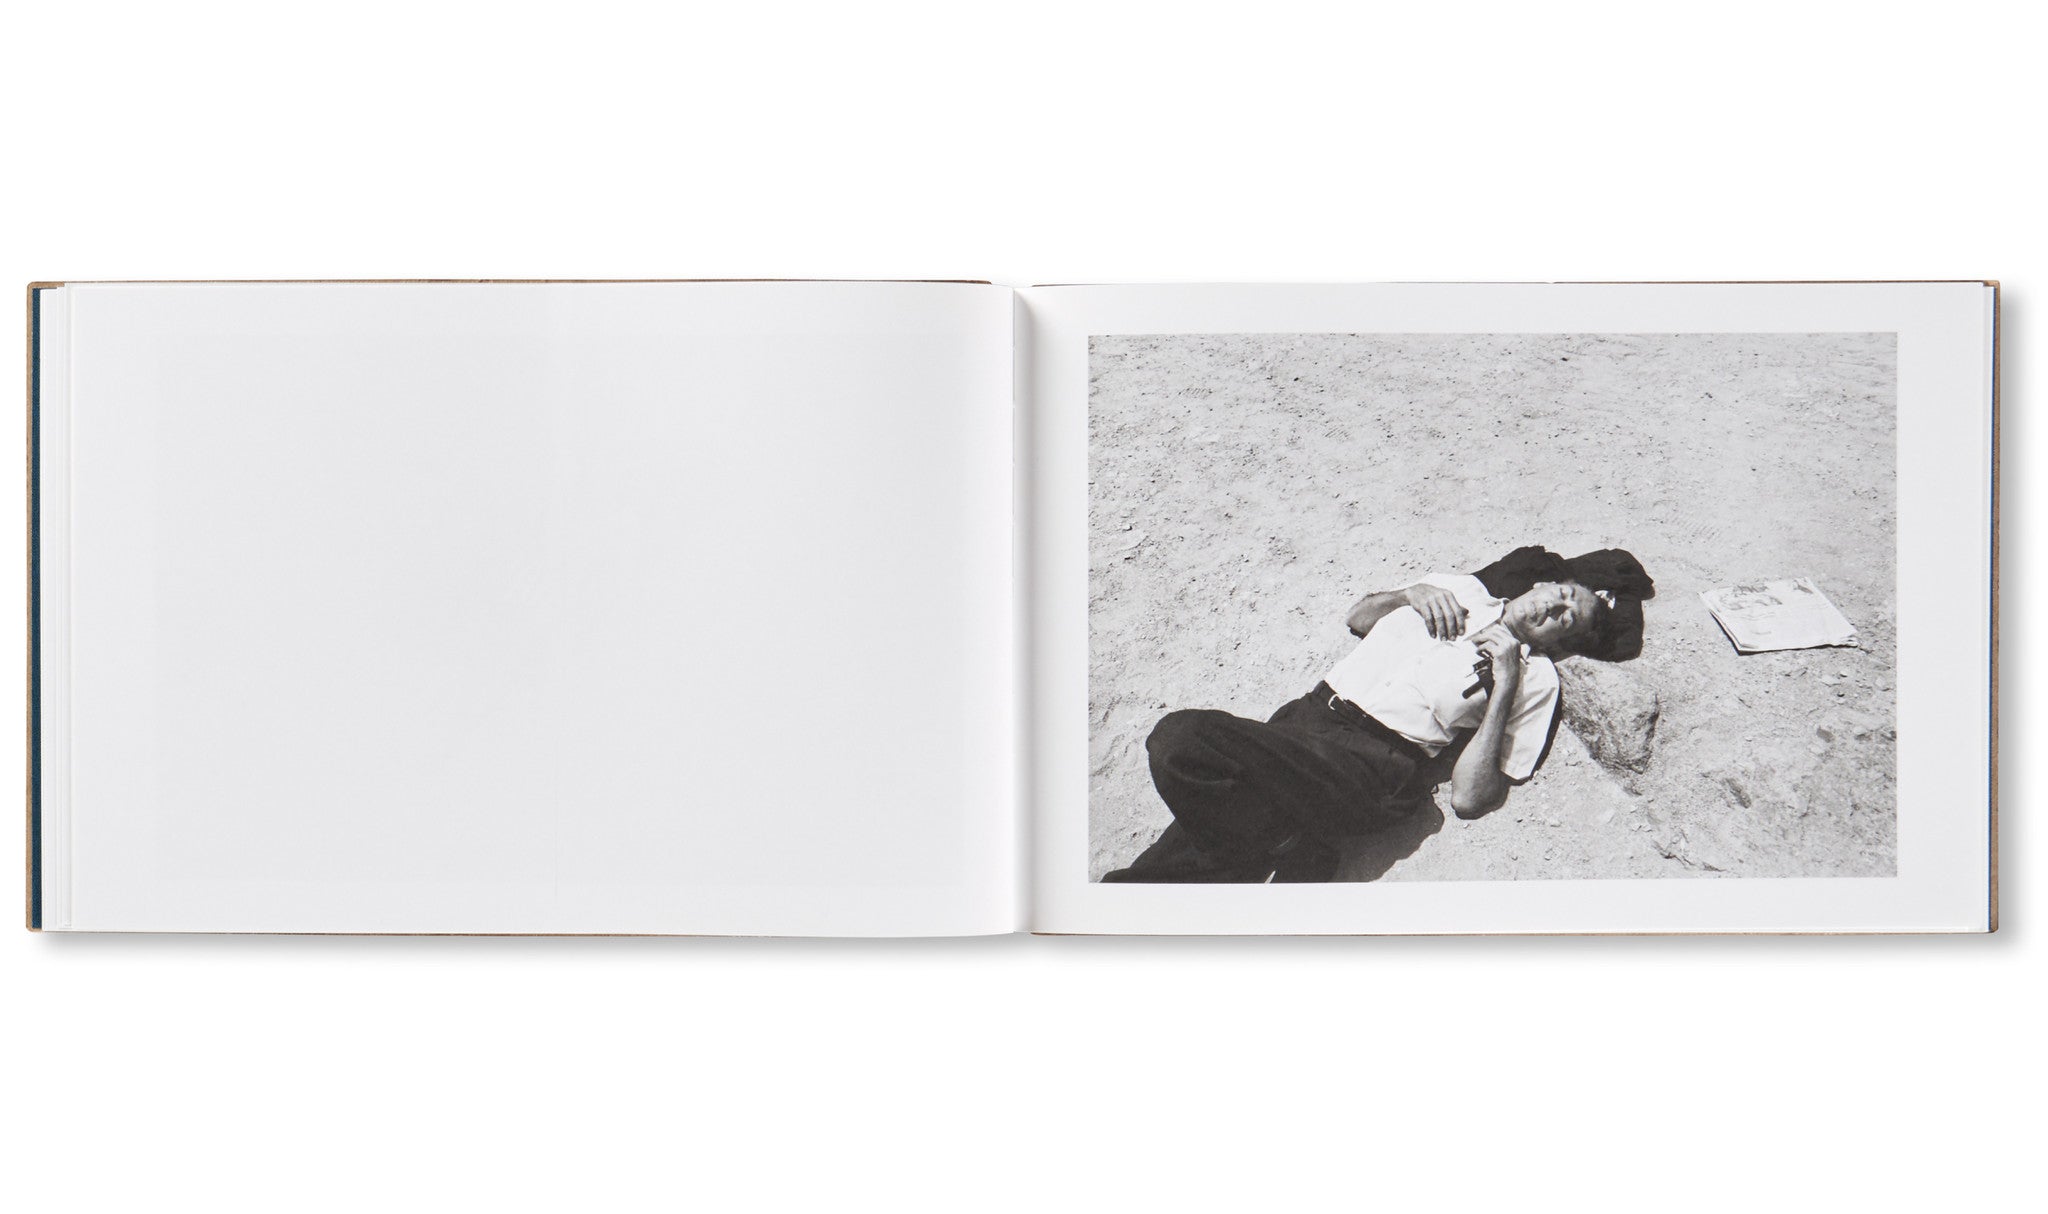 BEACH PICTURES, 1969-70 by Anthony Hernandez [SIGNED]